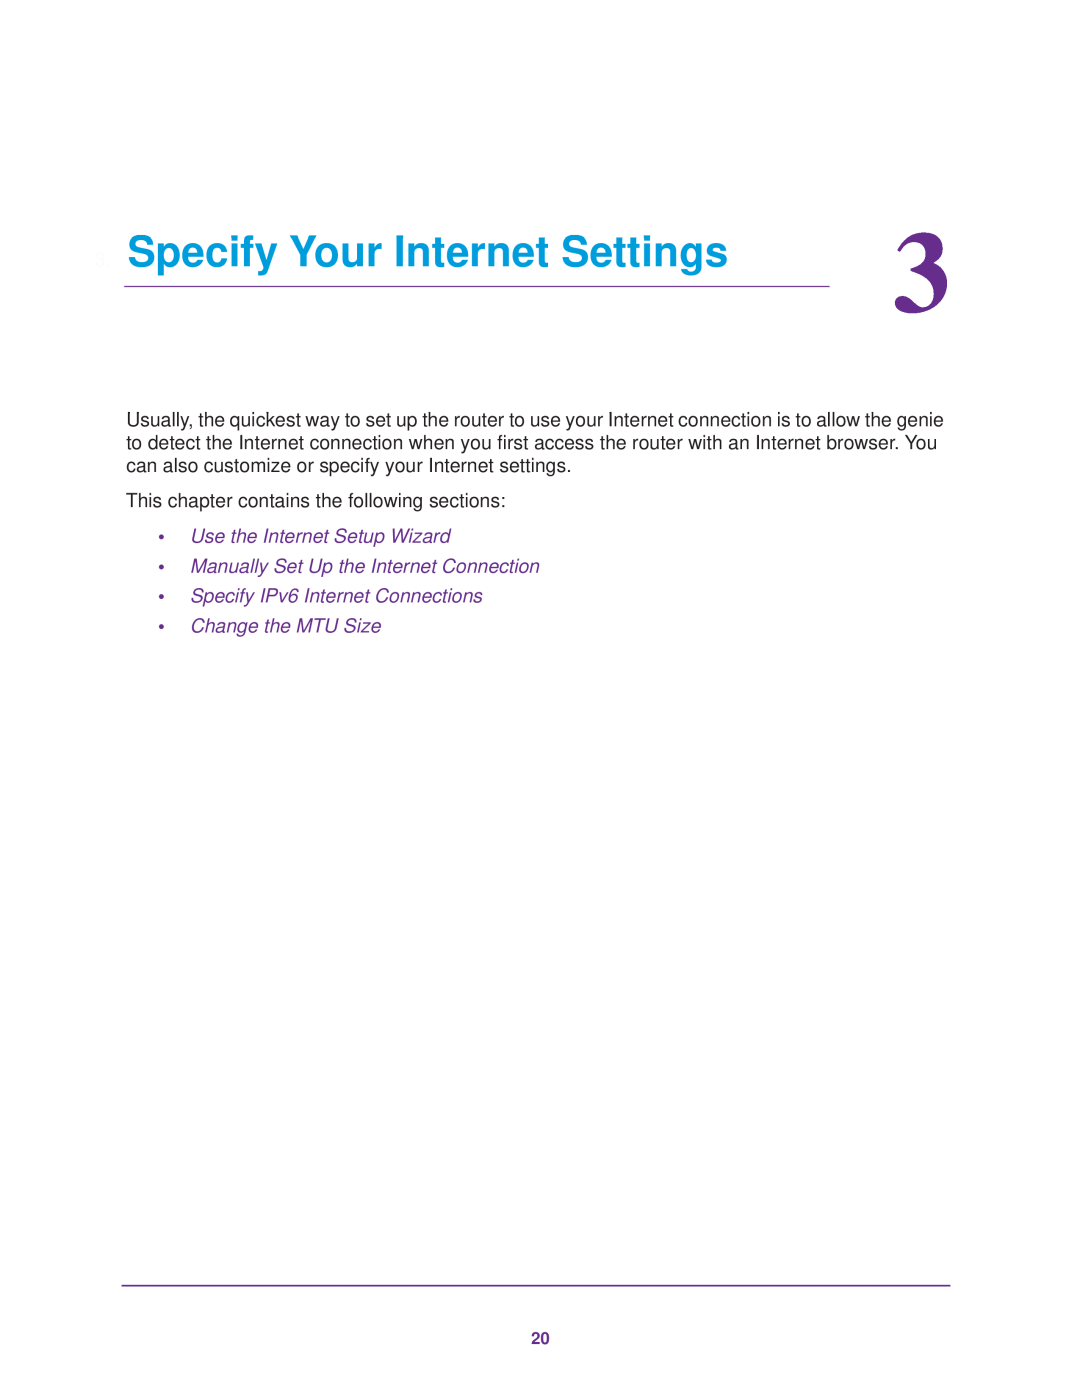 NETGEAR R7000 Specify Your Internet Settings, Use the Internet Setup Wizard Manually Set Up the Internet Connection 